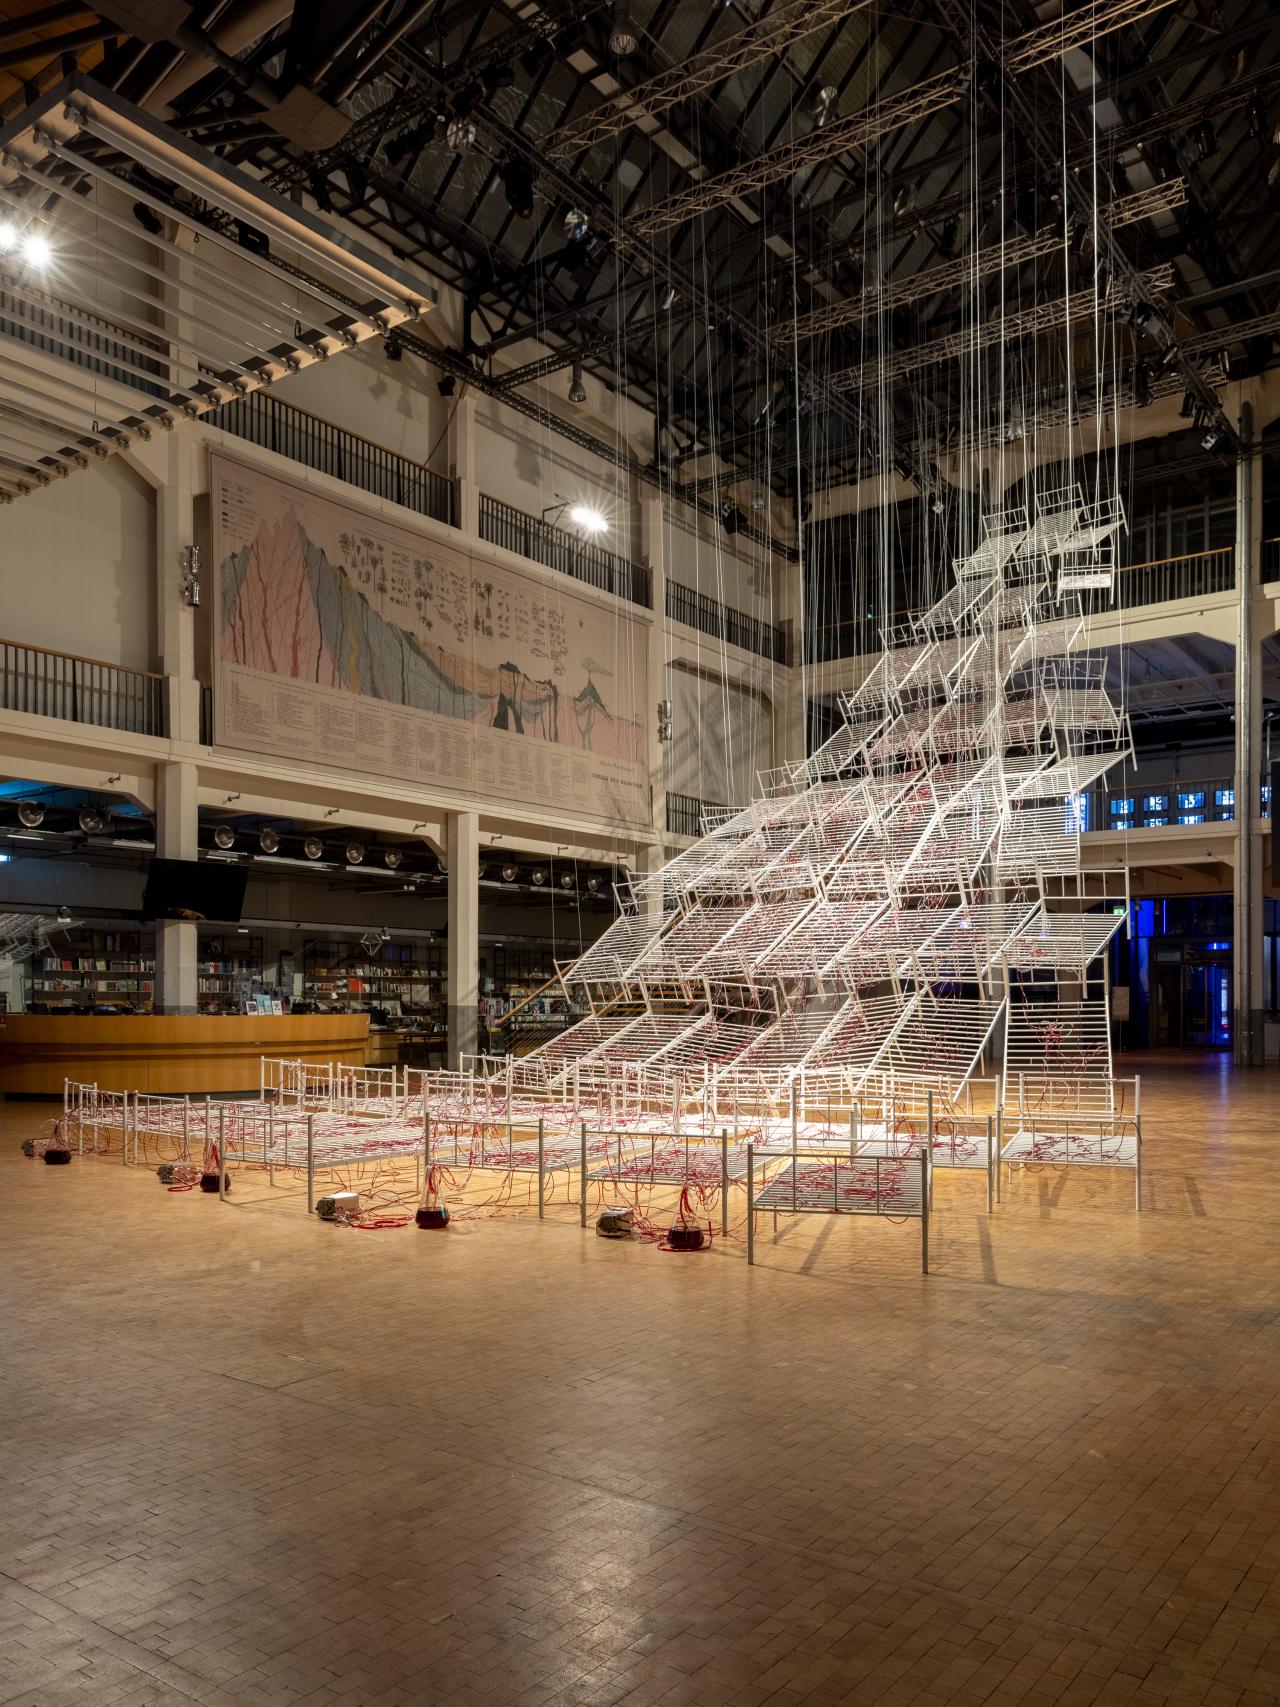 Installation view of Chiaru Shiota's »Connected to Life«. Hospital bed frames can be seen hanging from the ceiling in the shape of a pyramid. These are crisscrossed by tubes through which red paint flows.